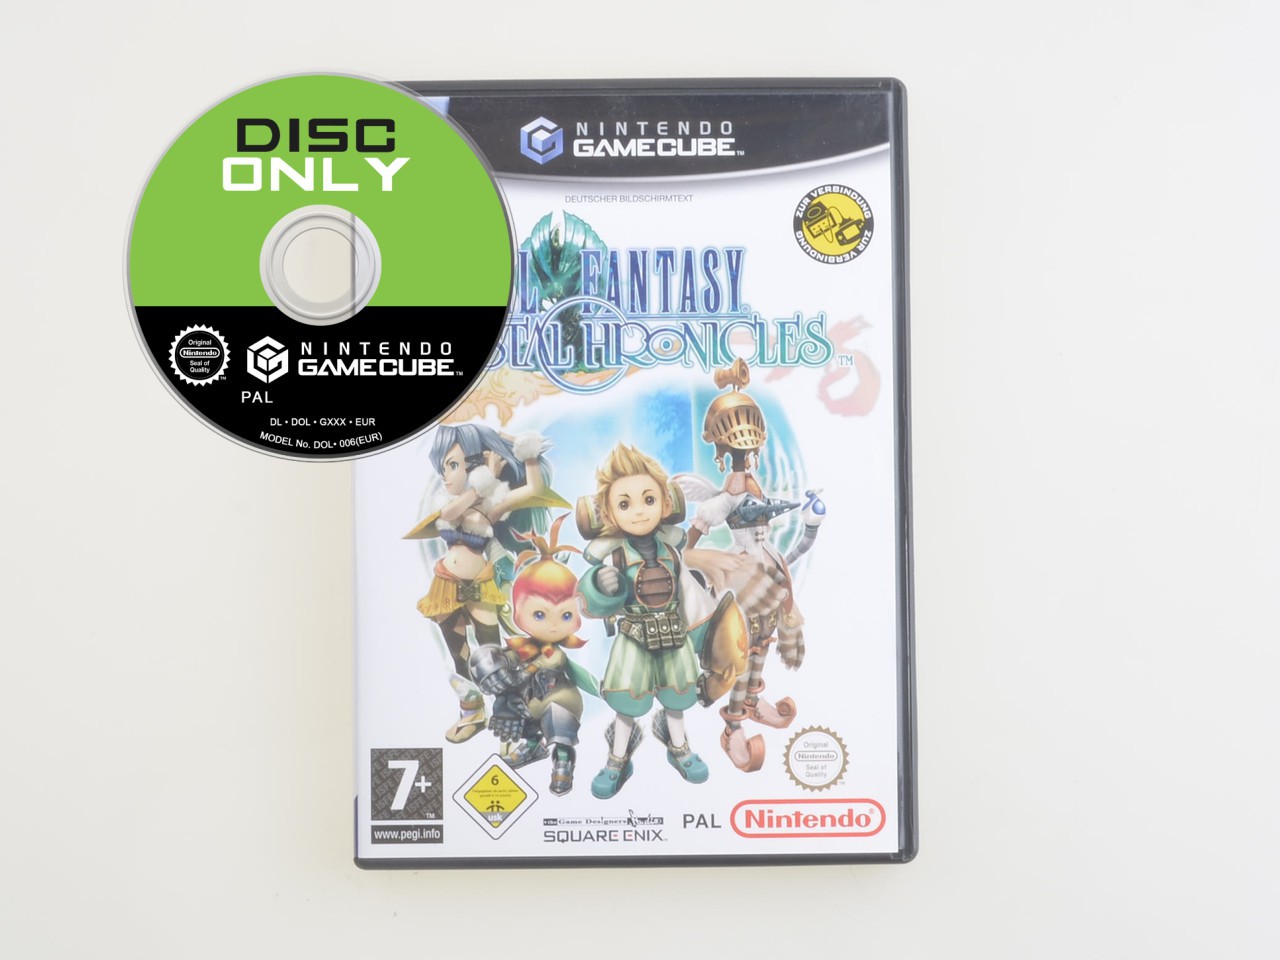 Final Fantasy: Crystal Chronicles - Disc Only Kopen | Gamecube Games